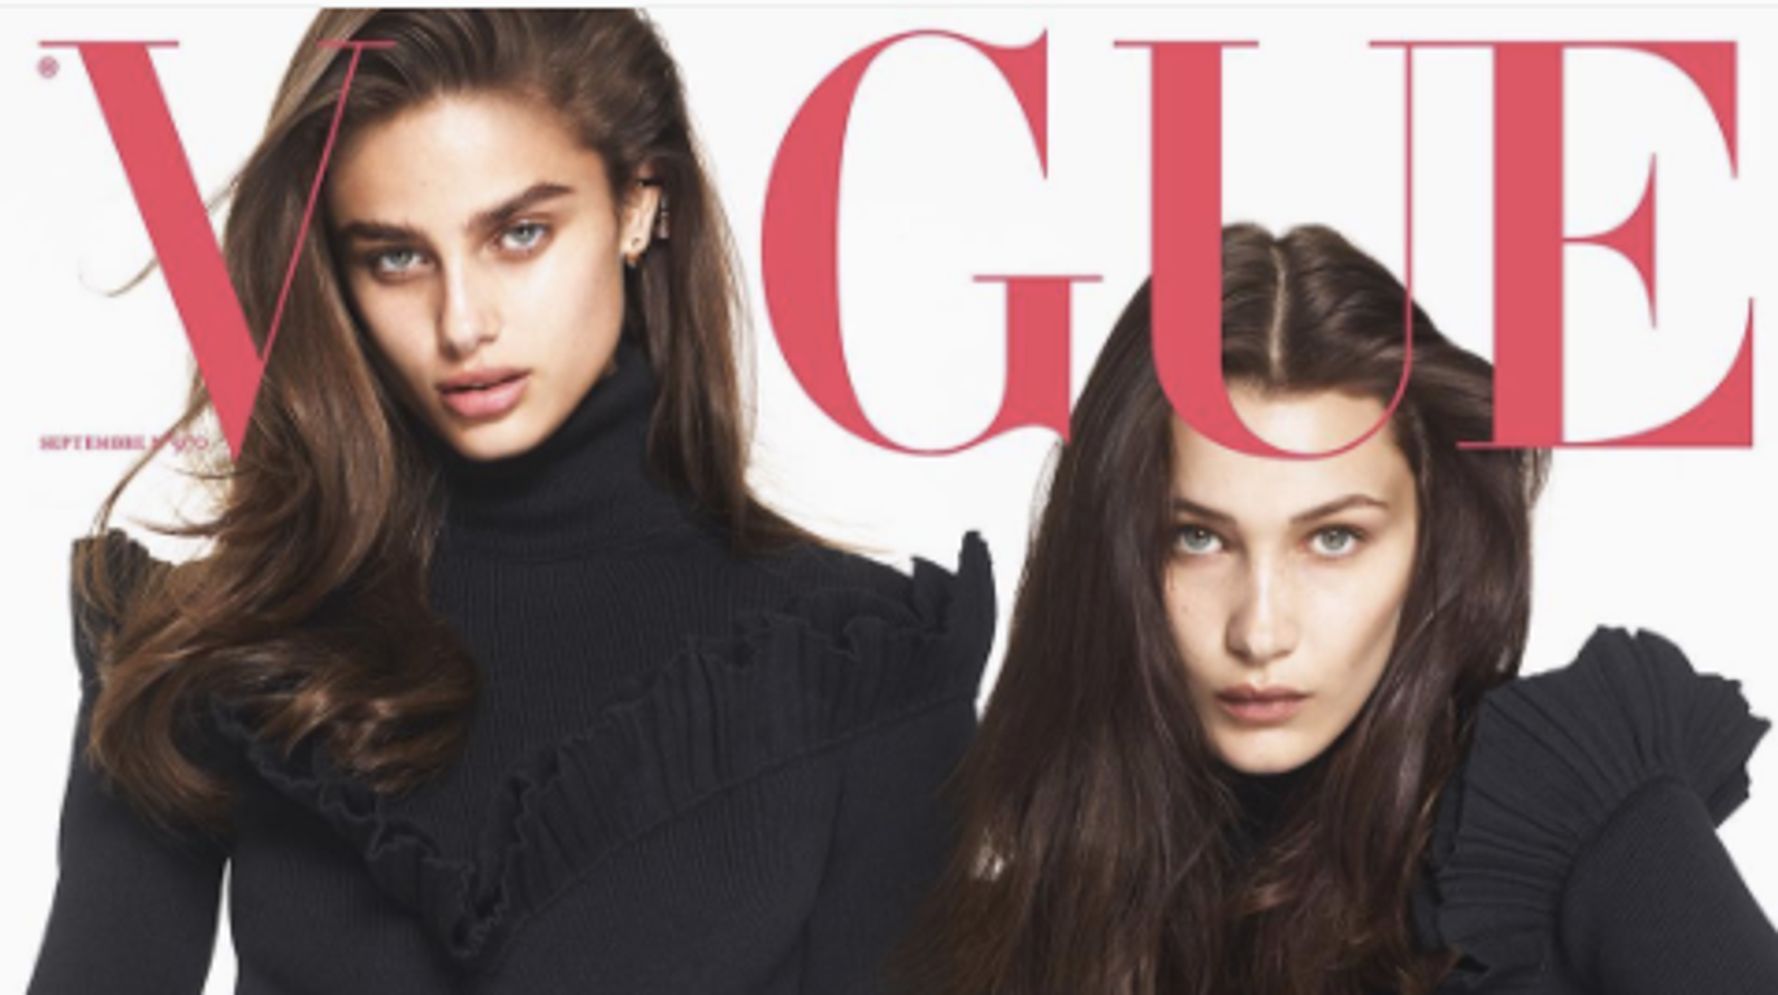 Were fashion magazines any more diverse in 2016? Only six women